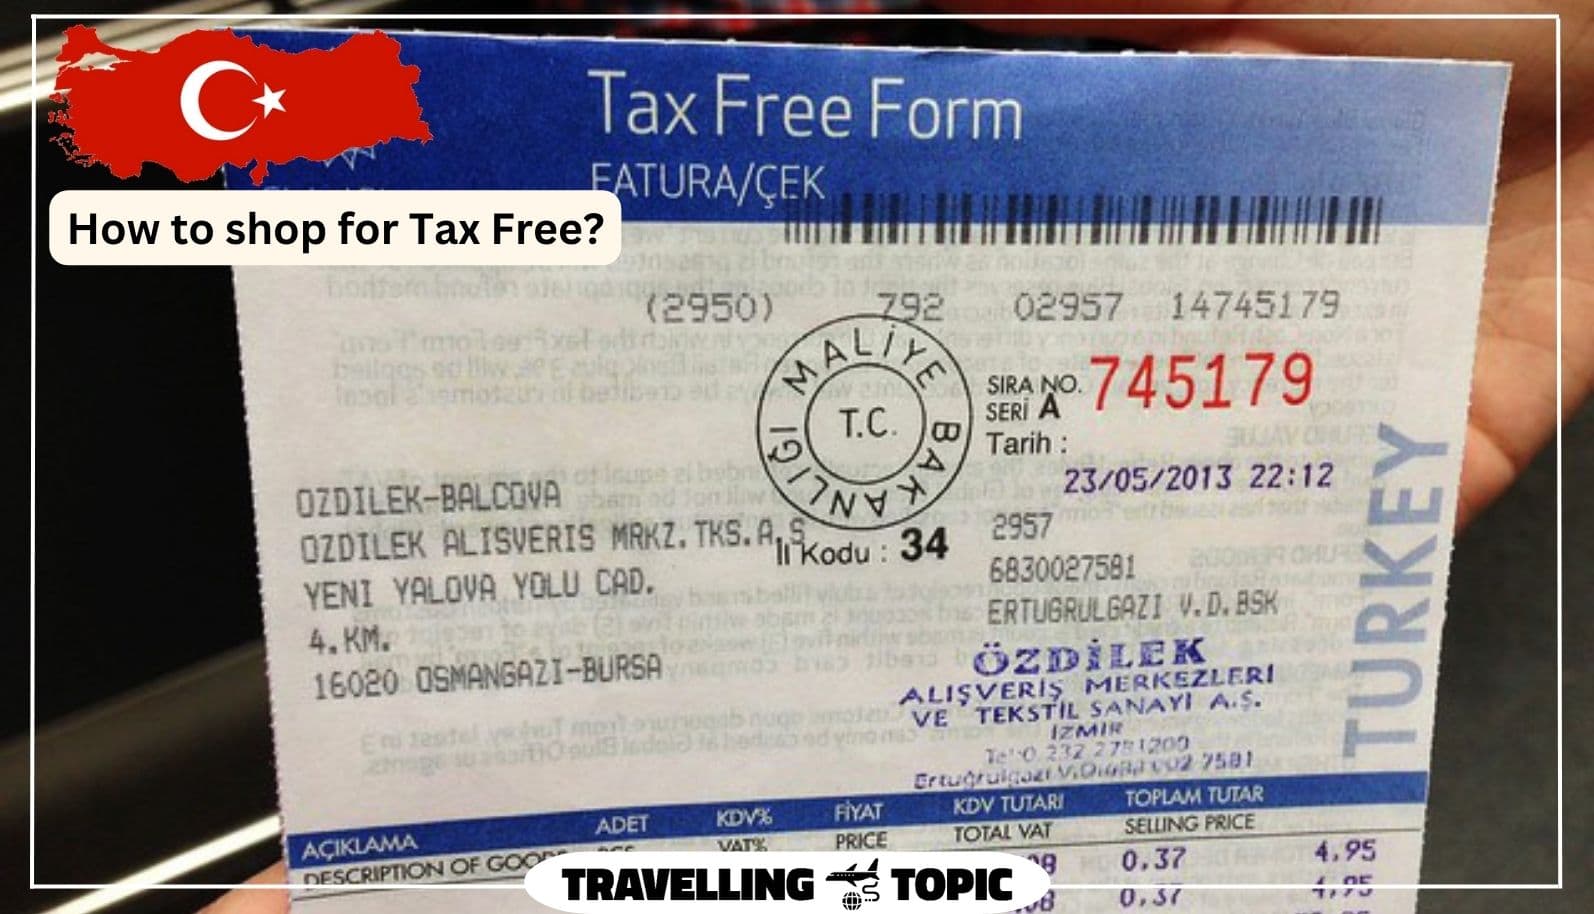 How to shop for Tax Free?